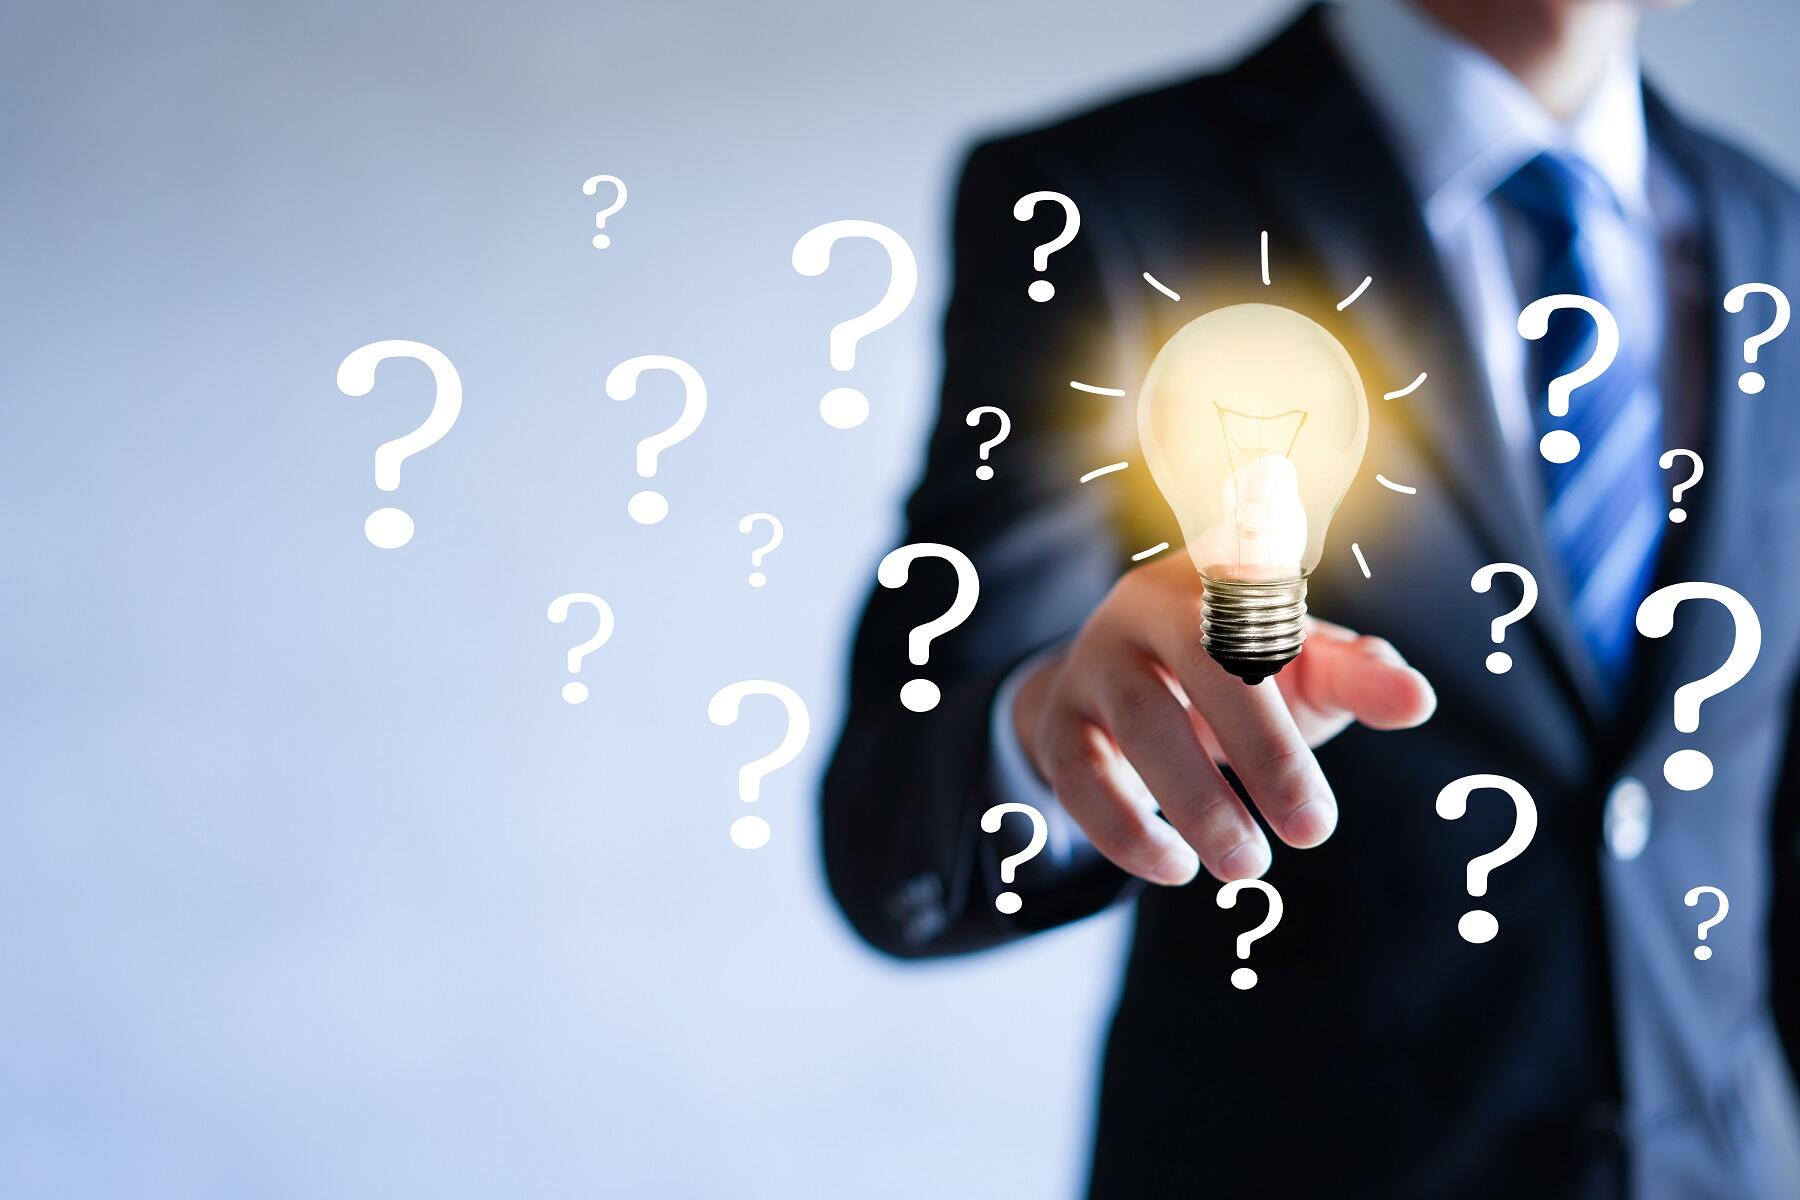 A person in business attire points at a lit light bulb surrounded by question marks.